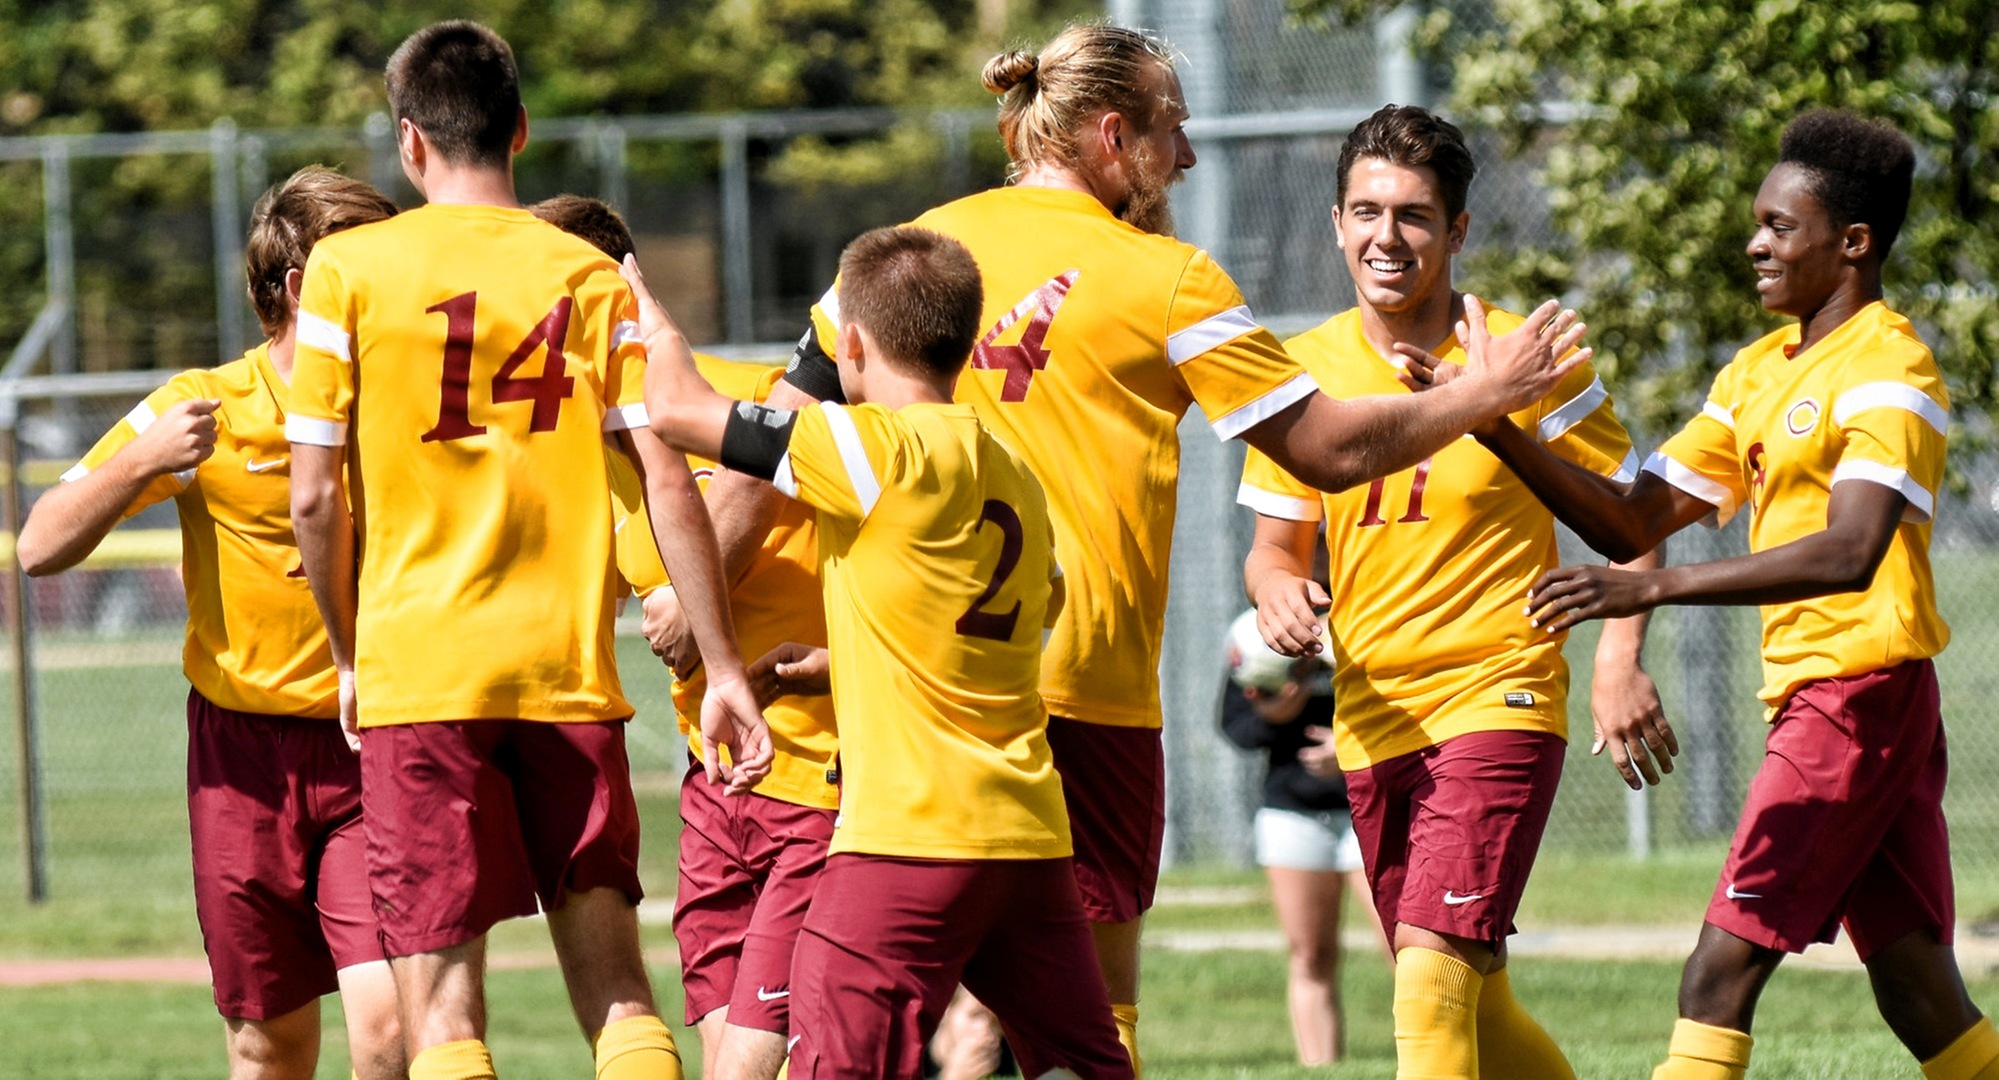 Concordia earned its second win of the weekend with a 2-1 2OT victory over St. John's.